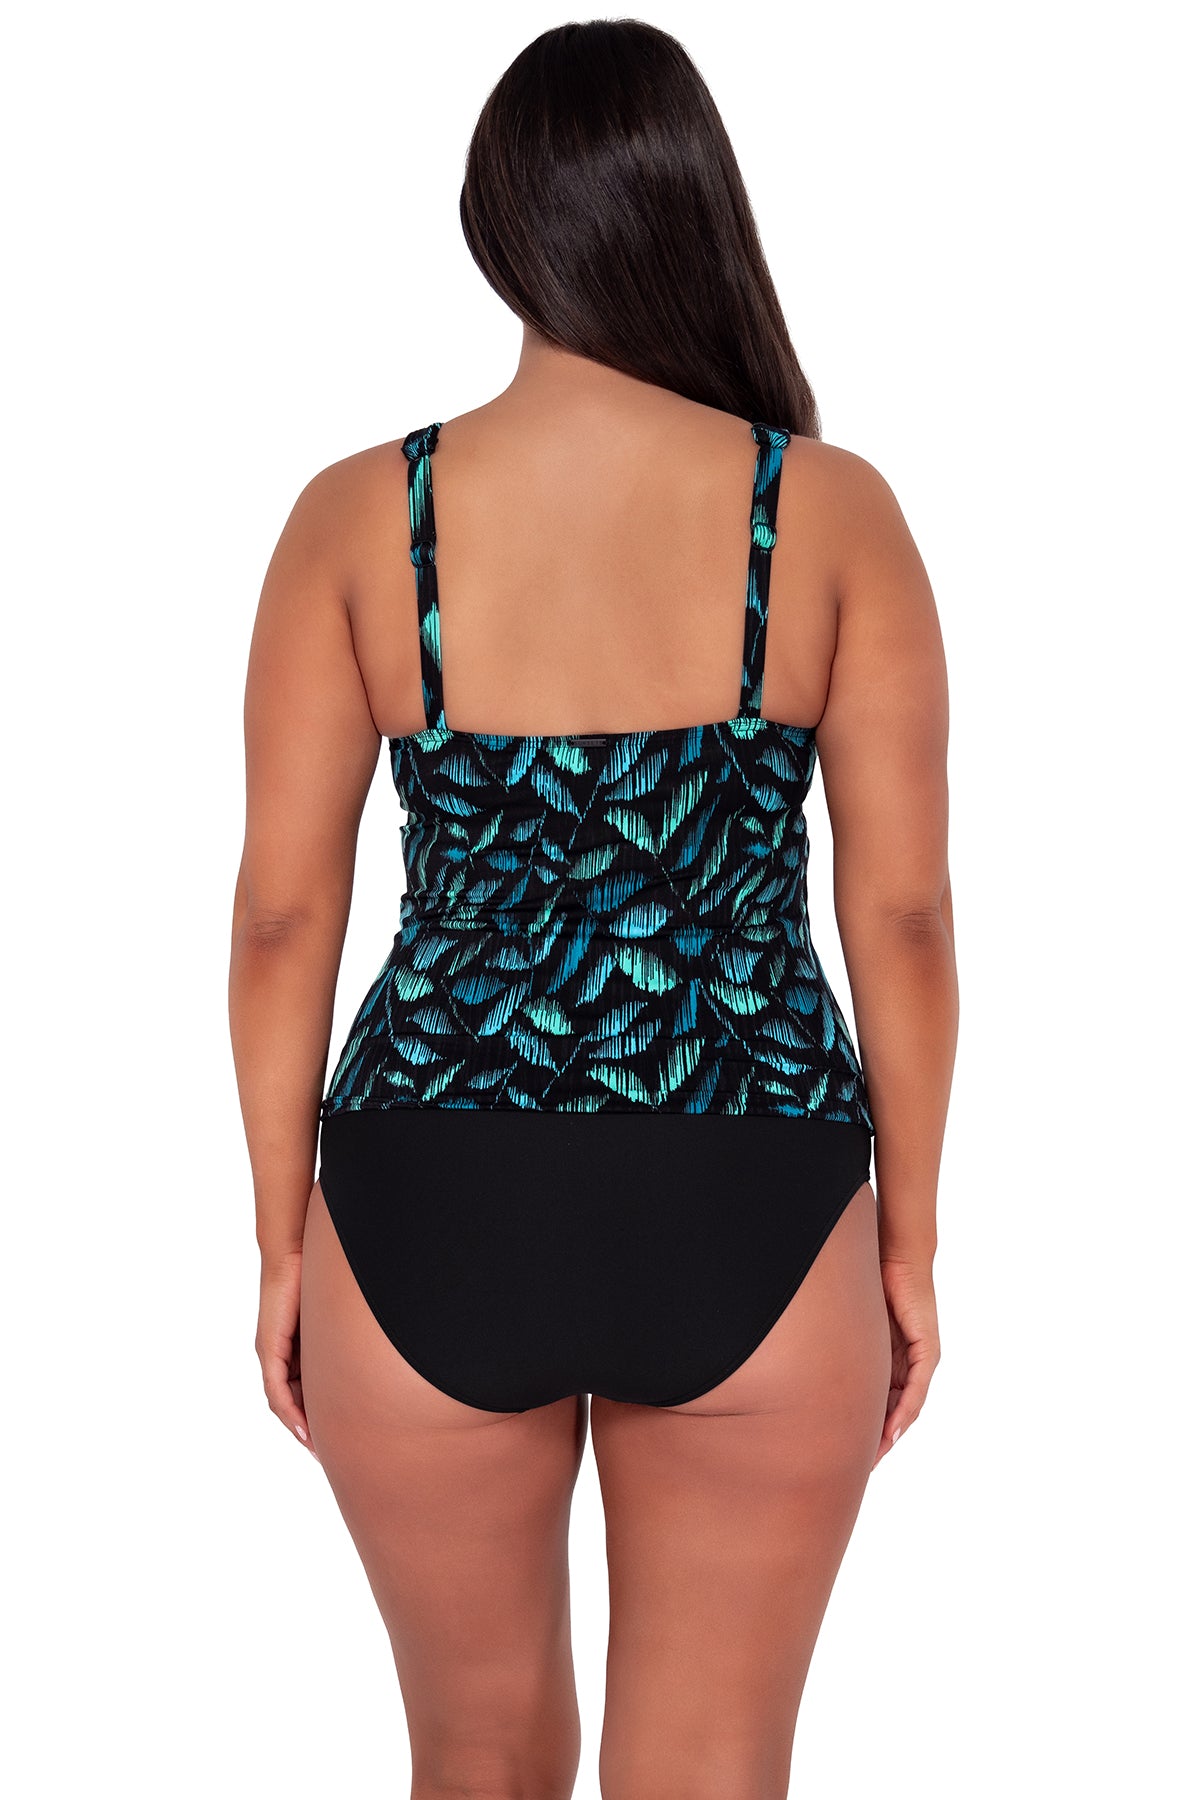 Back pose #1 of Nicki wearing Sunsets Cascade Seagrass Texture Elsie Tankini Top paired with Hannah High Waist bikini bottom